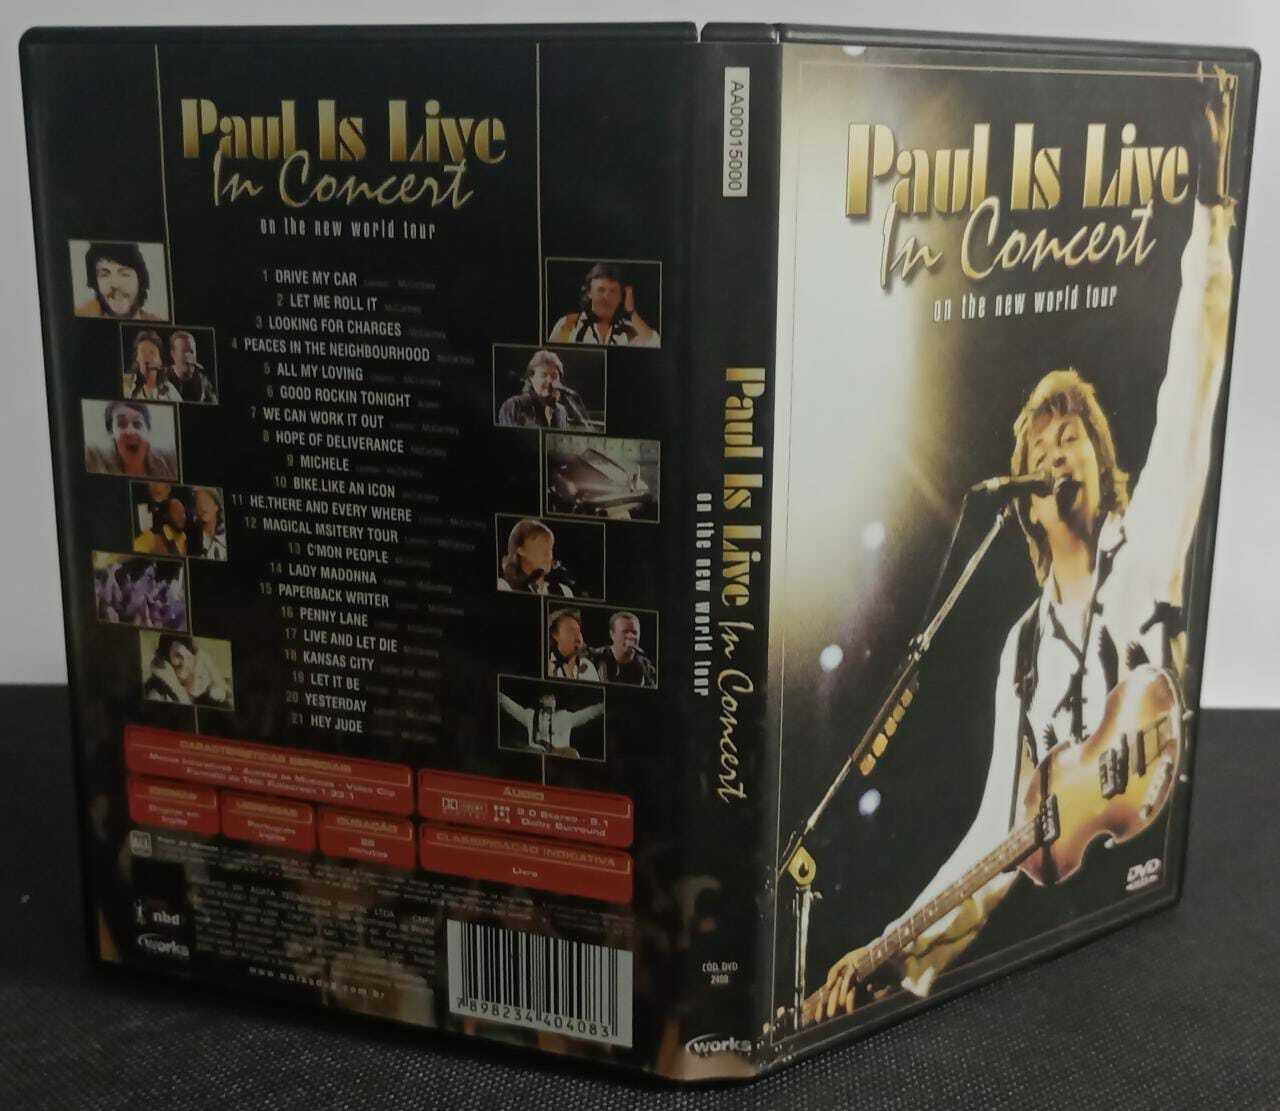 DVD - Paul McCartney - Paul is Live In Concert On The New World Tour